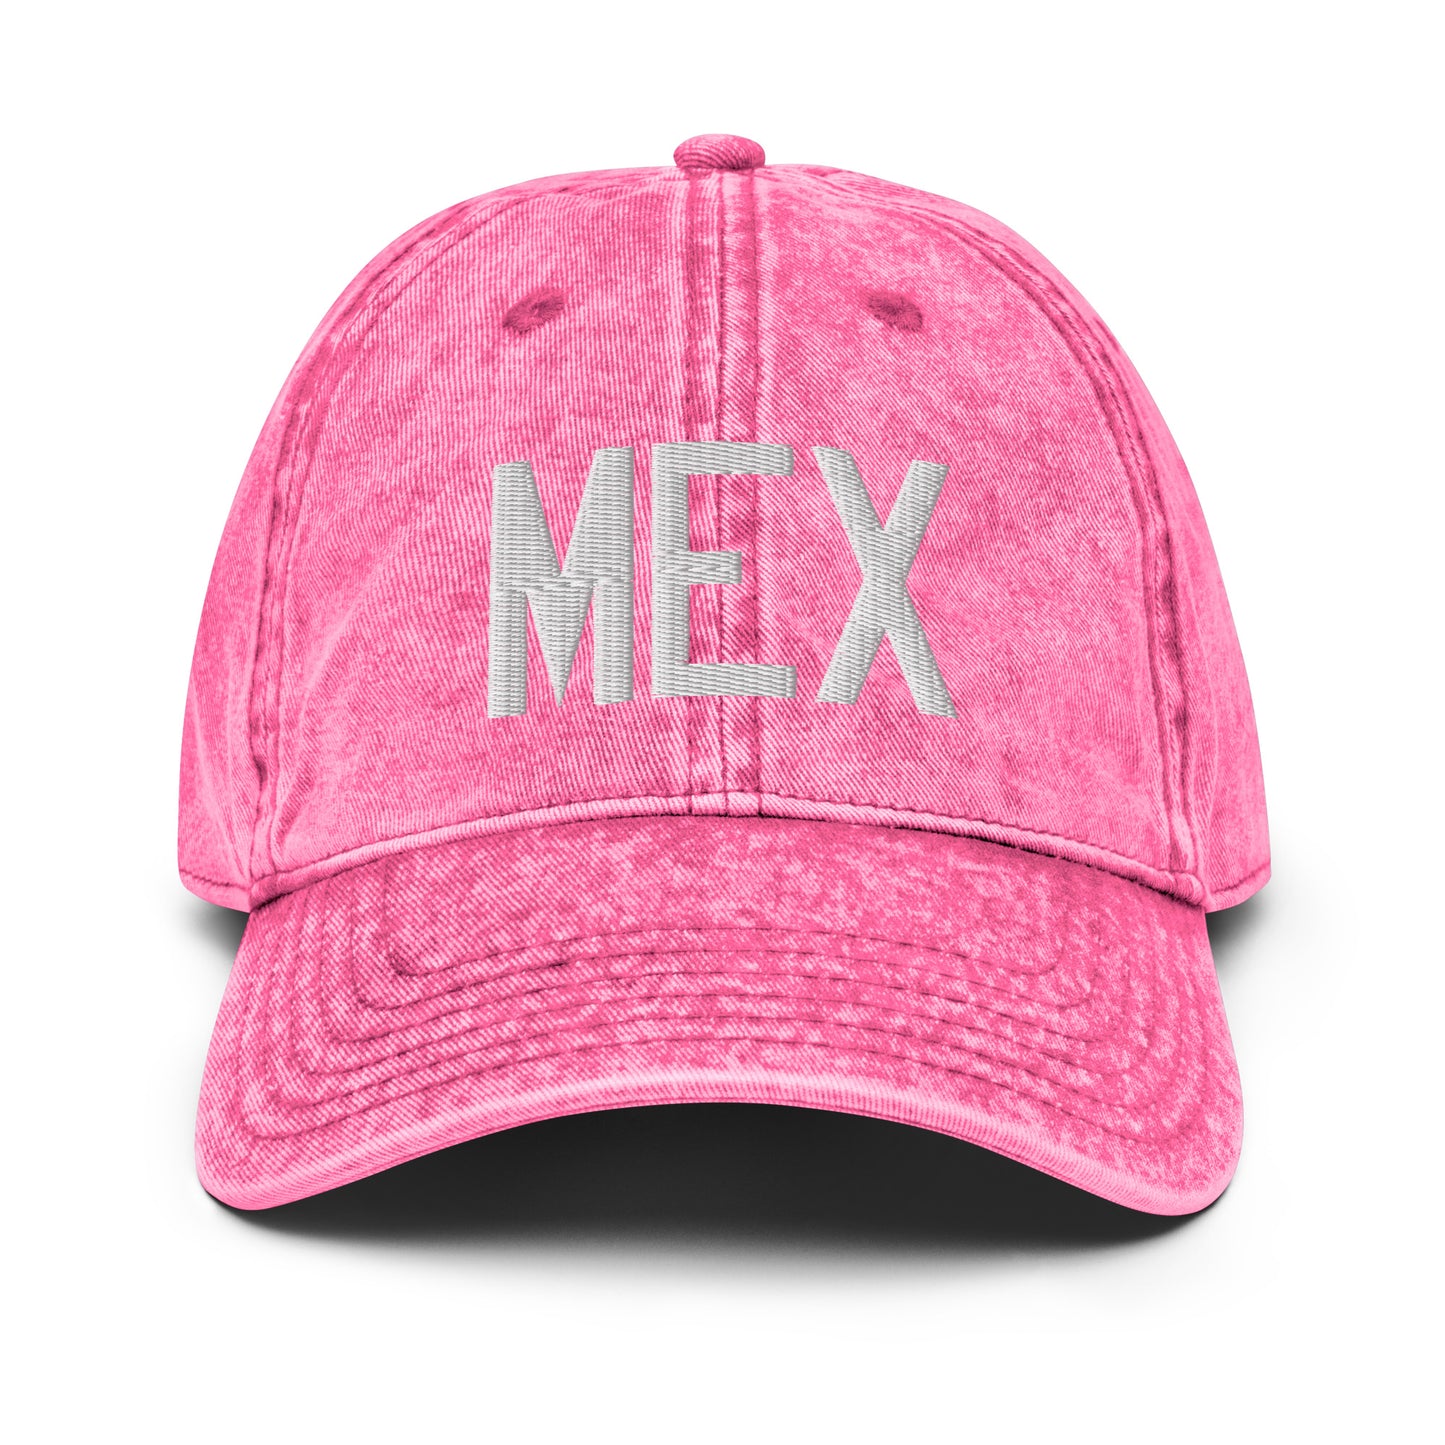 Airport Code Twill Cap - White • MEX Mexico City • YHM Designs - Image 25